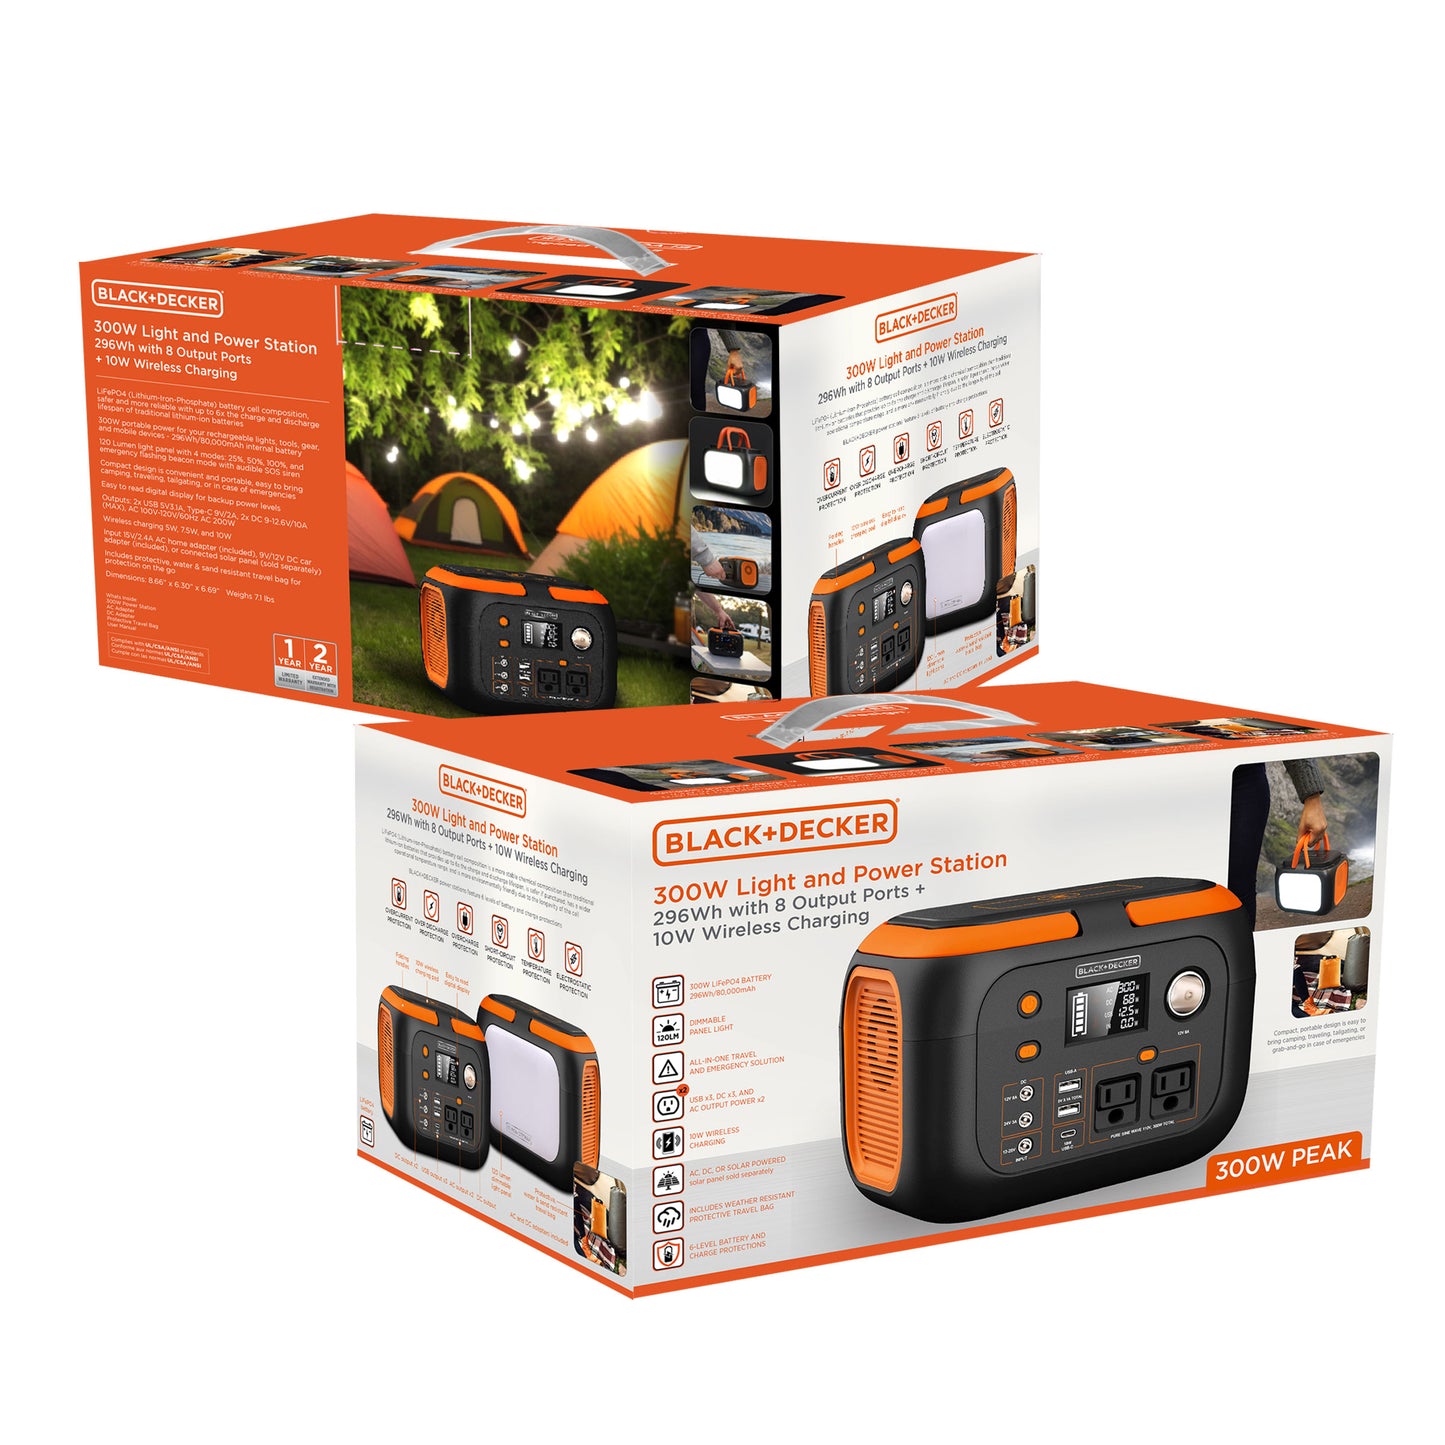 BLACK+DECKER® 300W Light and Power Station 296Wh with 8 Output Ports + 10W Wireless Charging